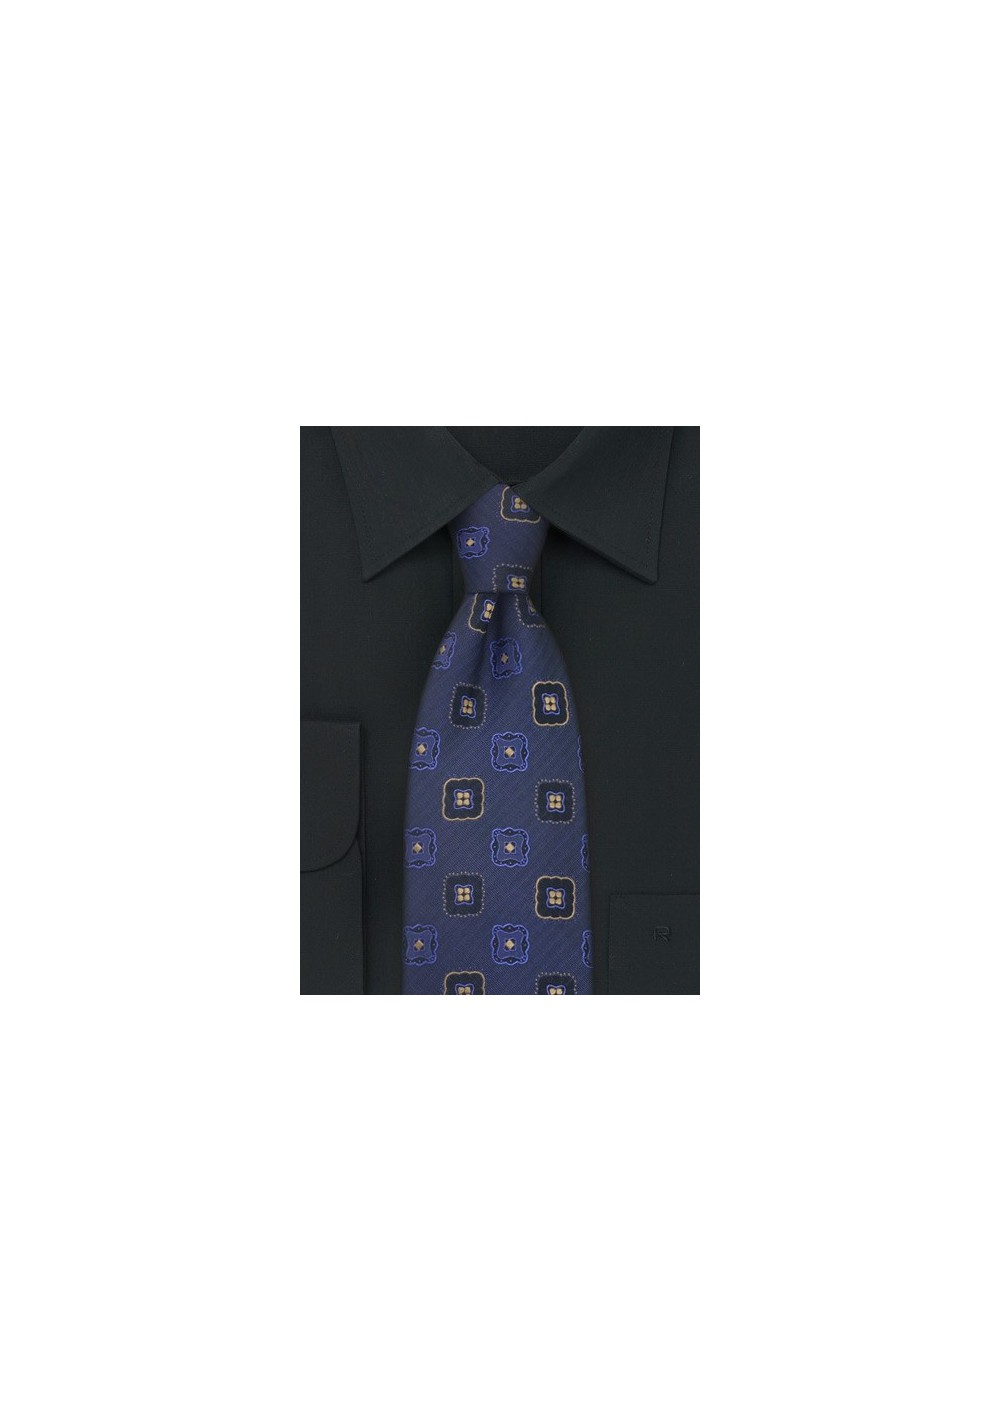 Midnight-Blue Floral Tie by Chavalier